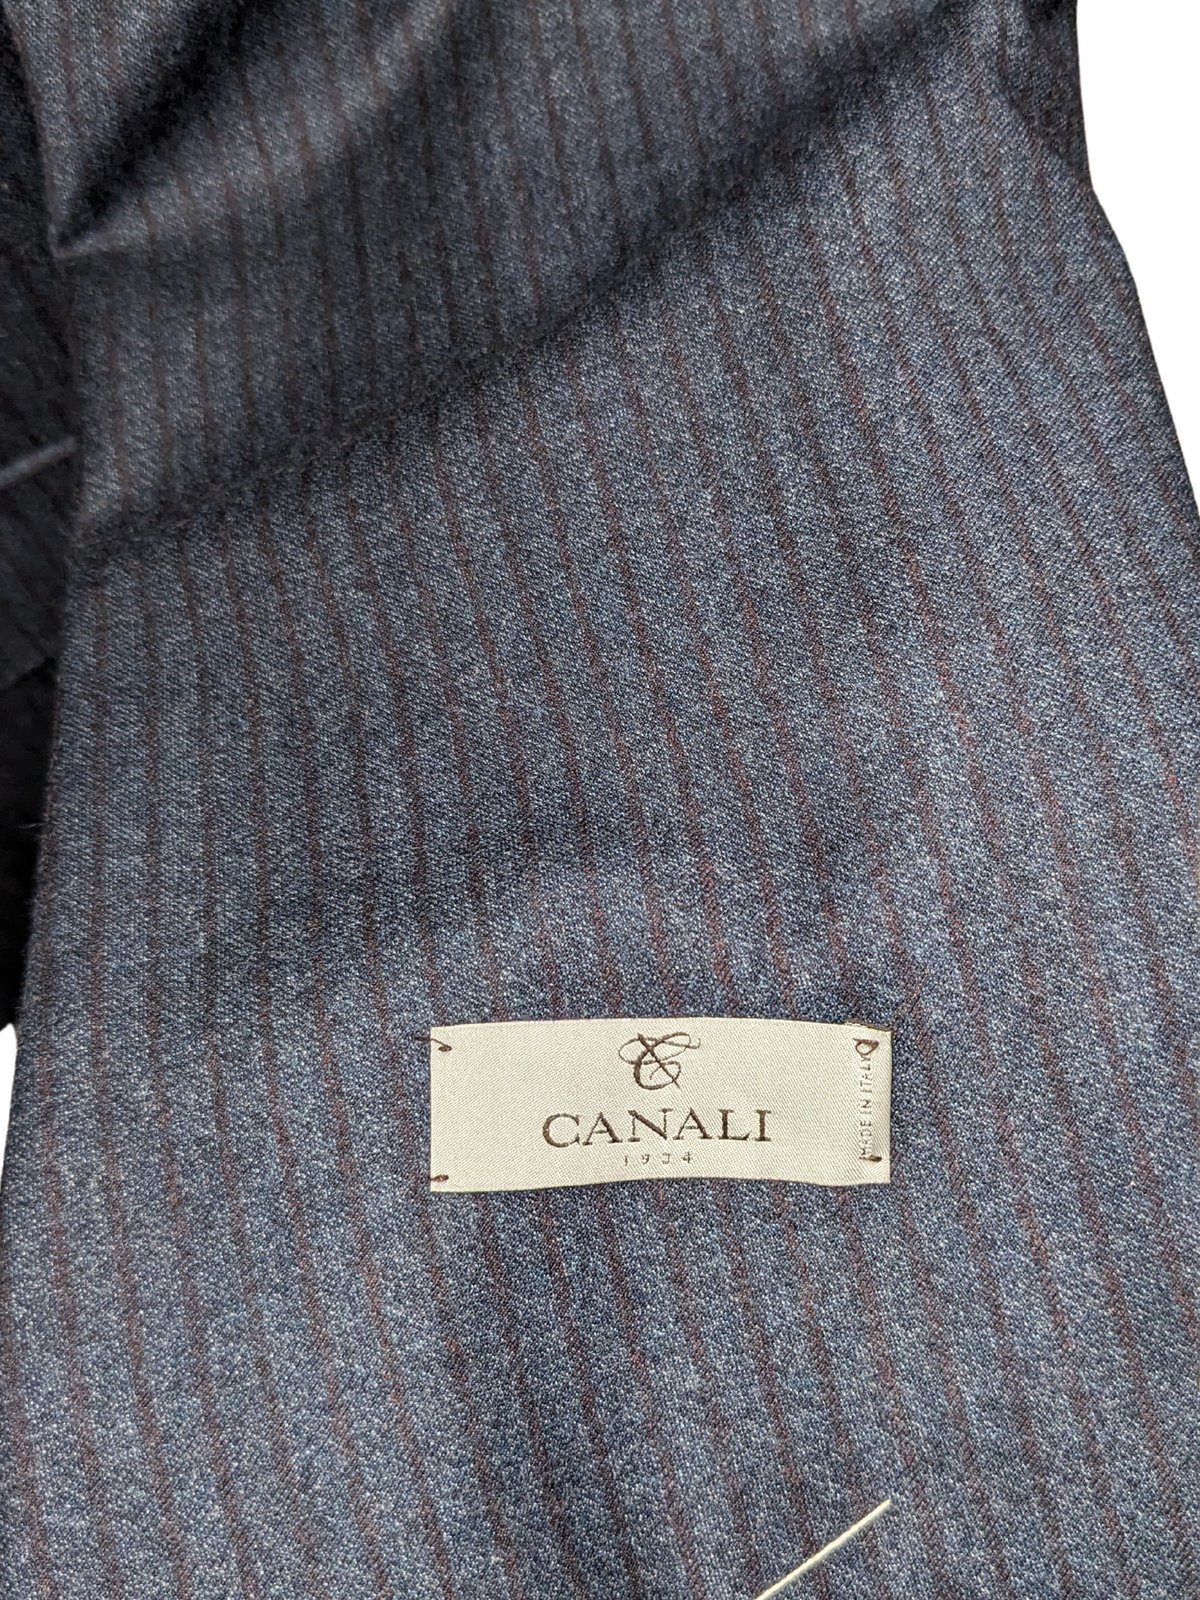 Canali 1934 Mens Navy Pinstriped 44L Drop 7 100% Wool 2 Piece Suit